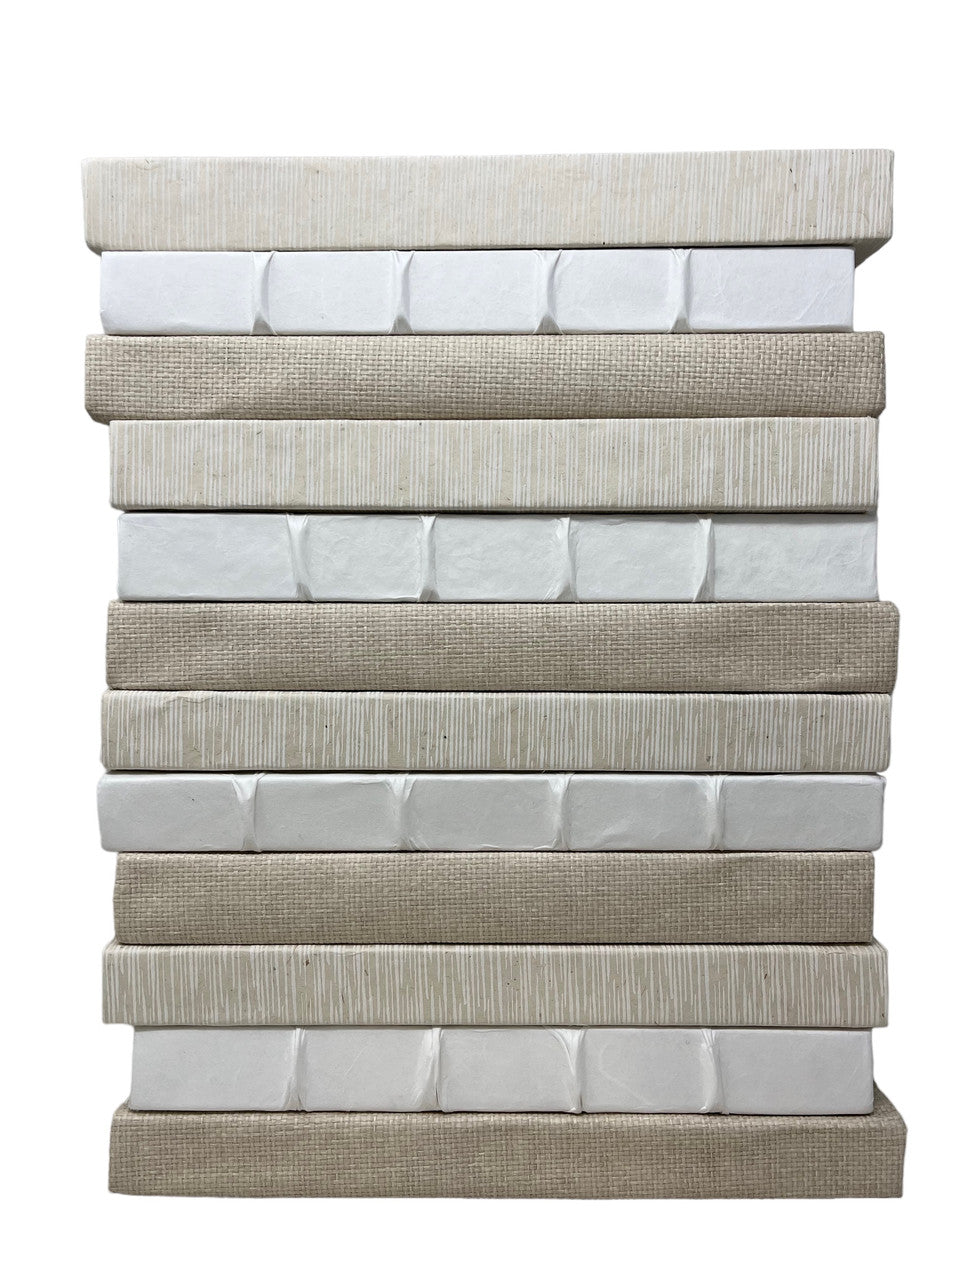 Raised Band White, Grasscloth and Striated White on Neutral Books